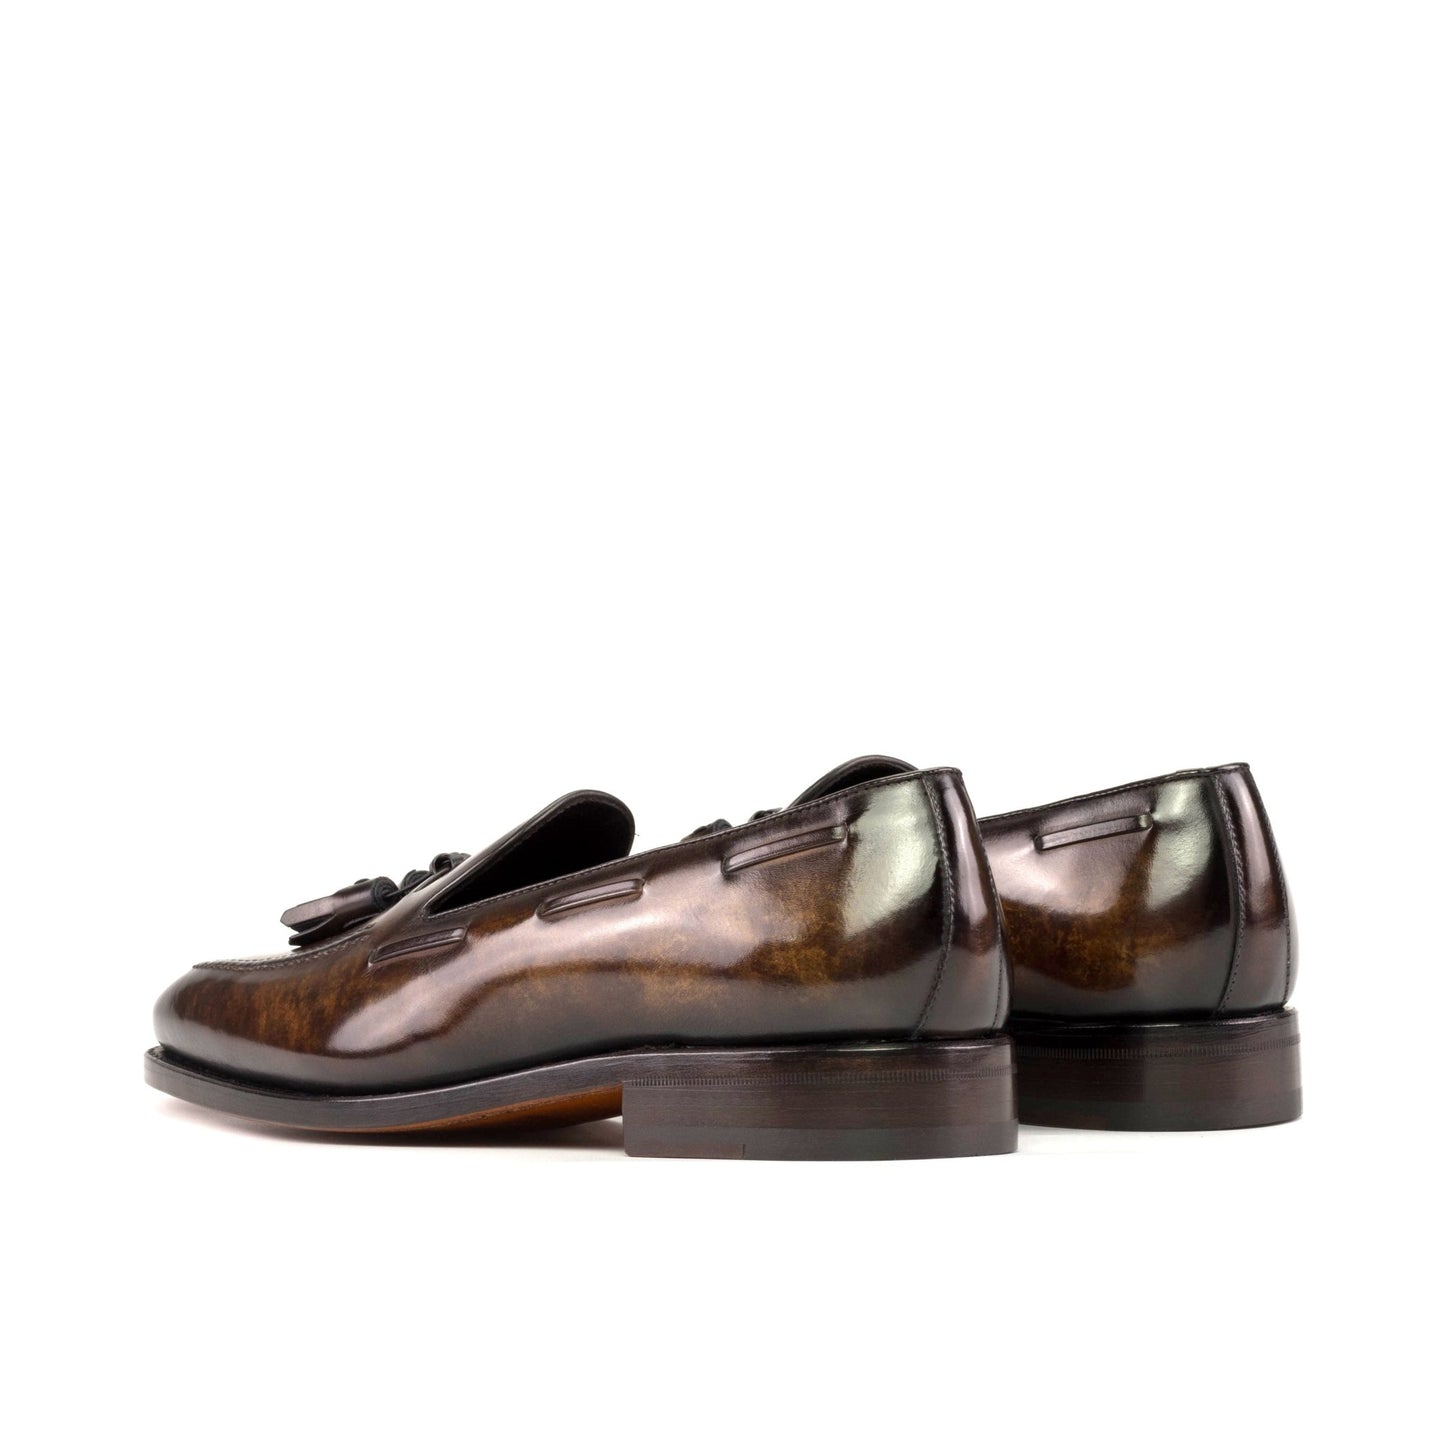 Tassel Loafer in Brown Patina - Zatorres | Free Shipping on orders over $200